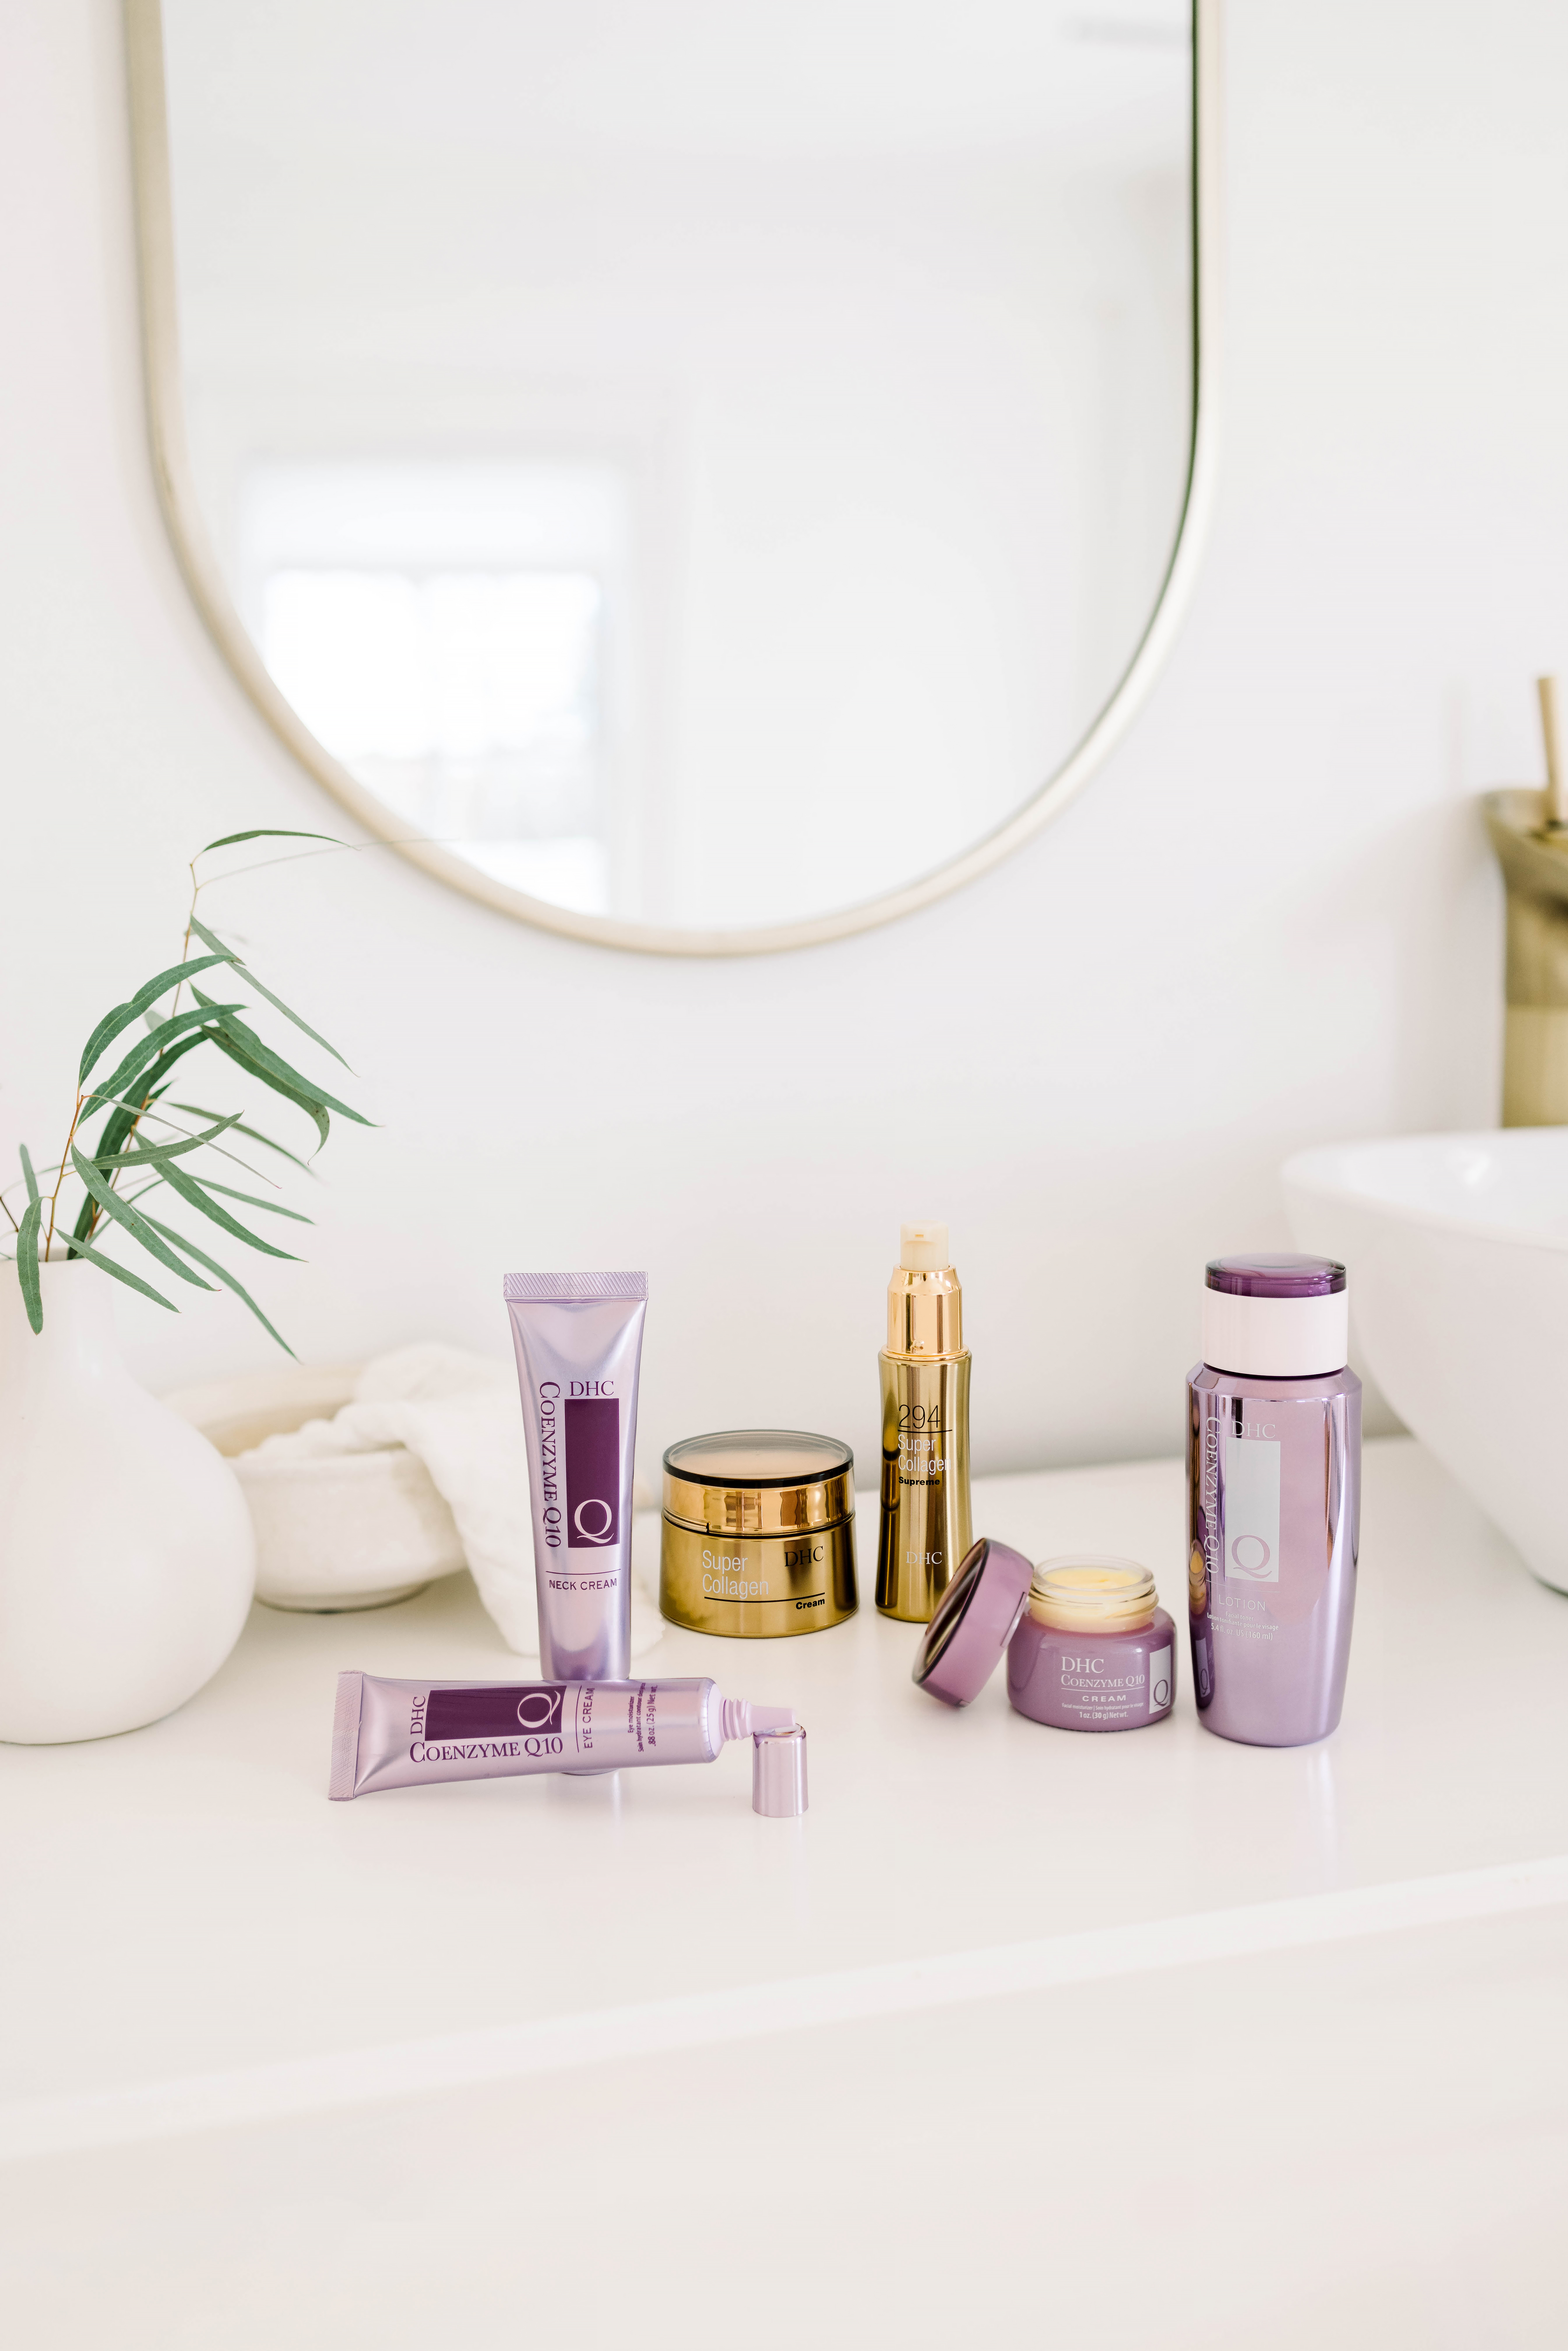 dhc skincare product photography